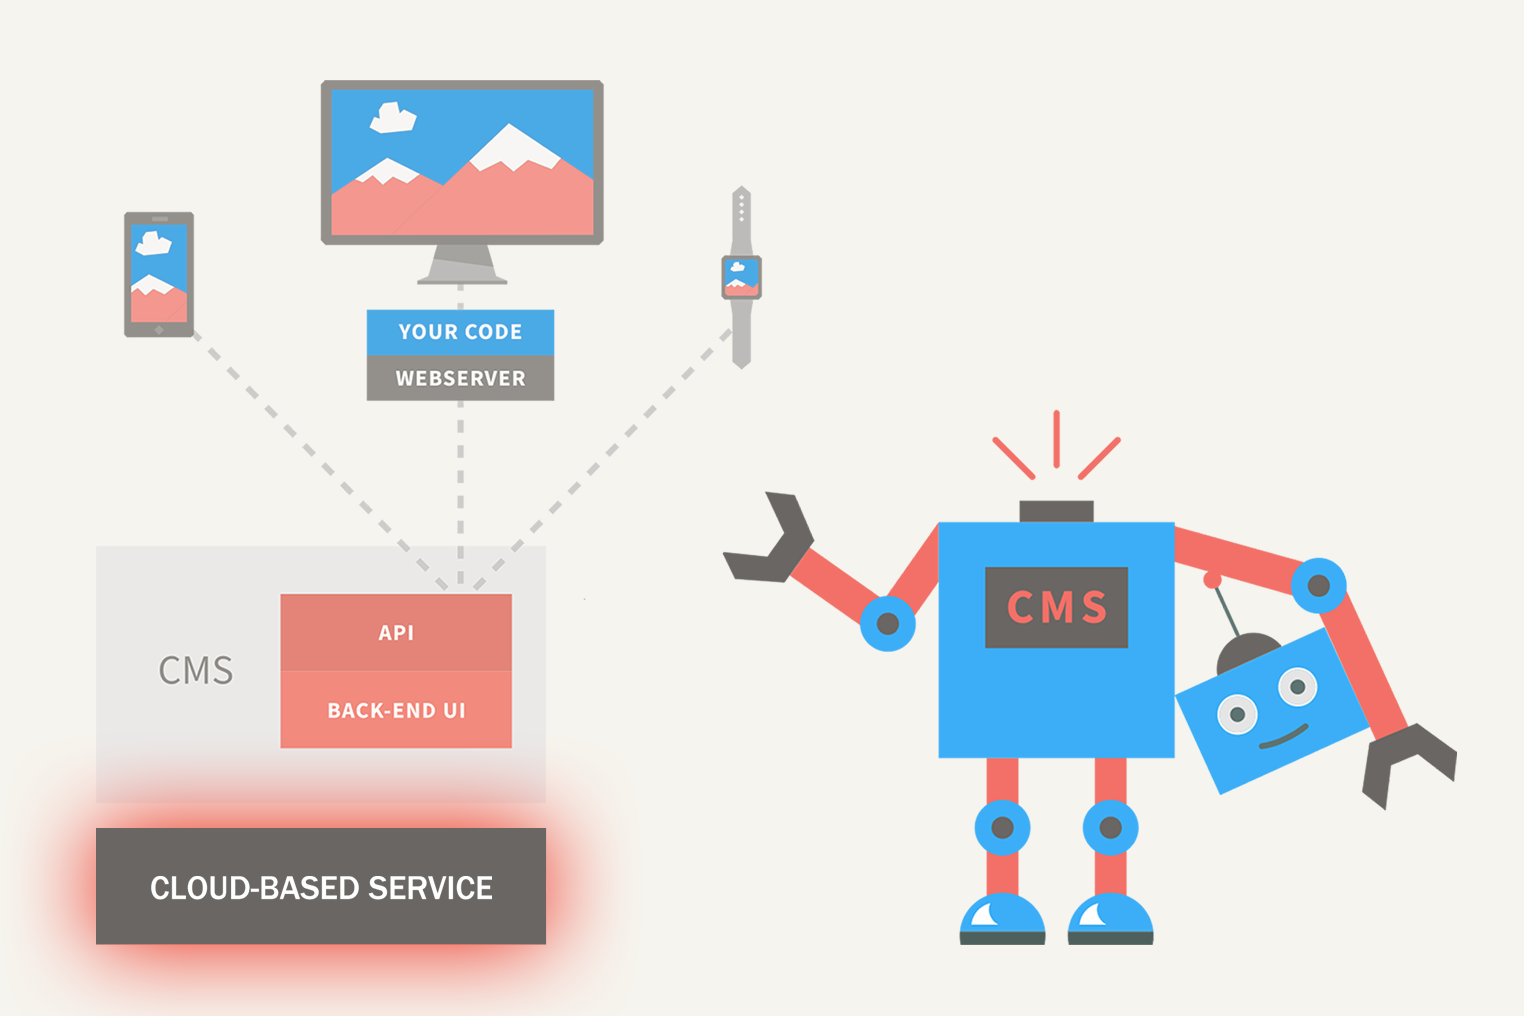 Content as a Service (CaaS)